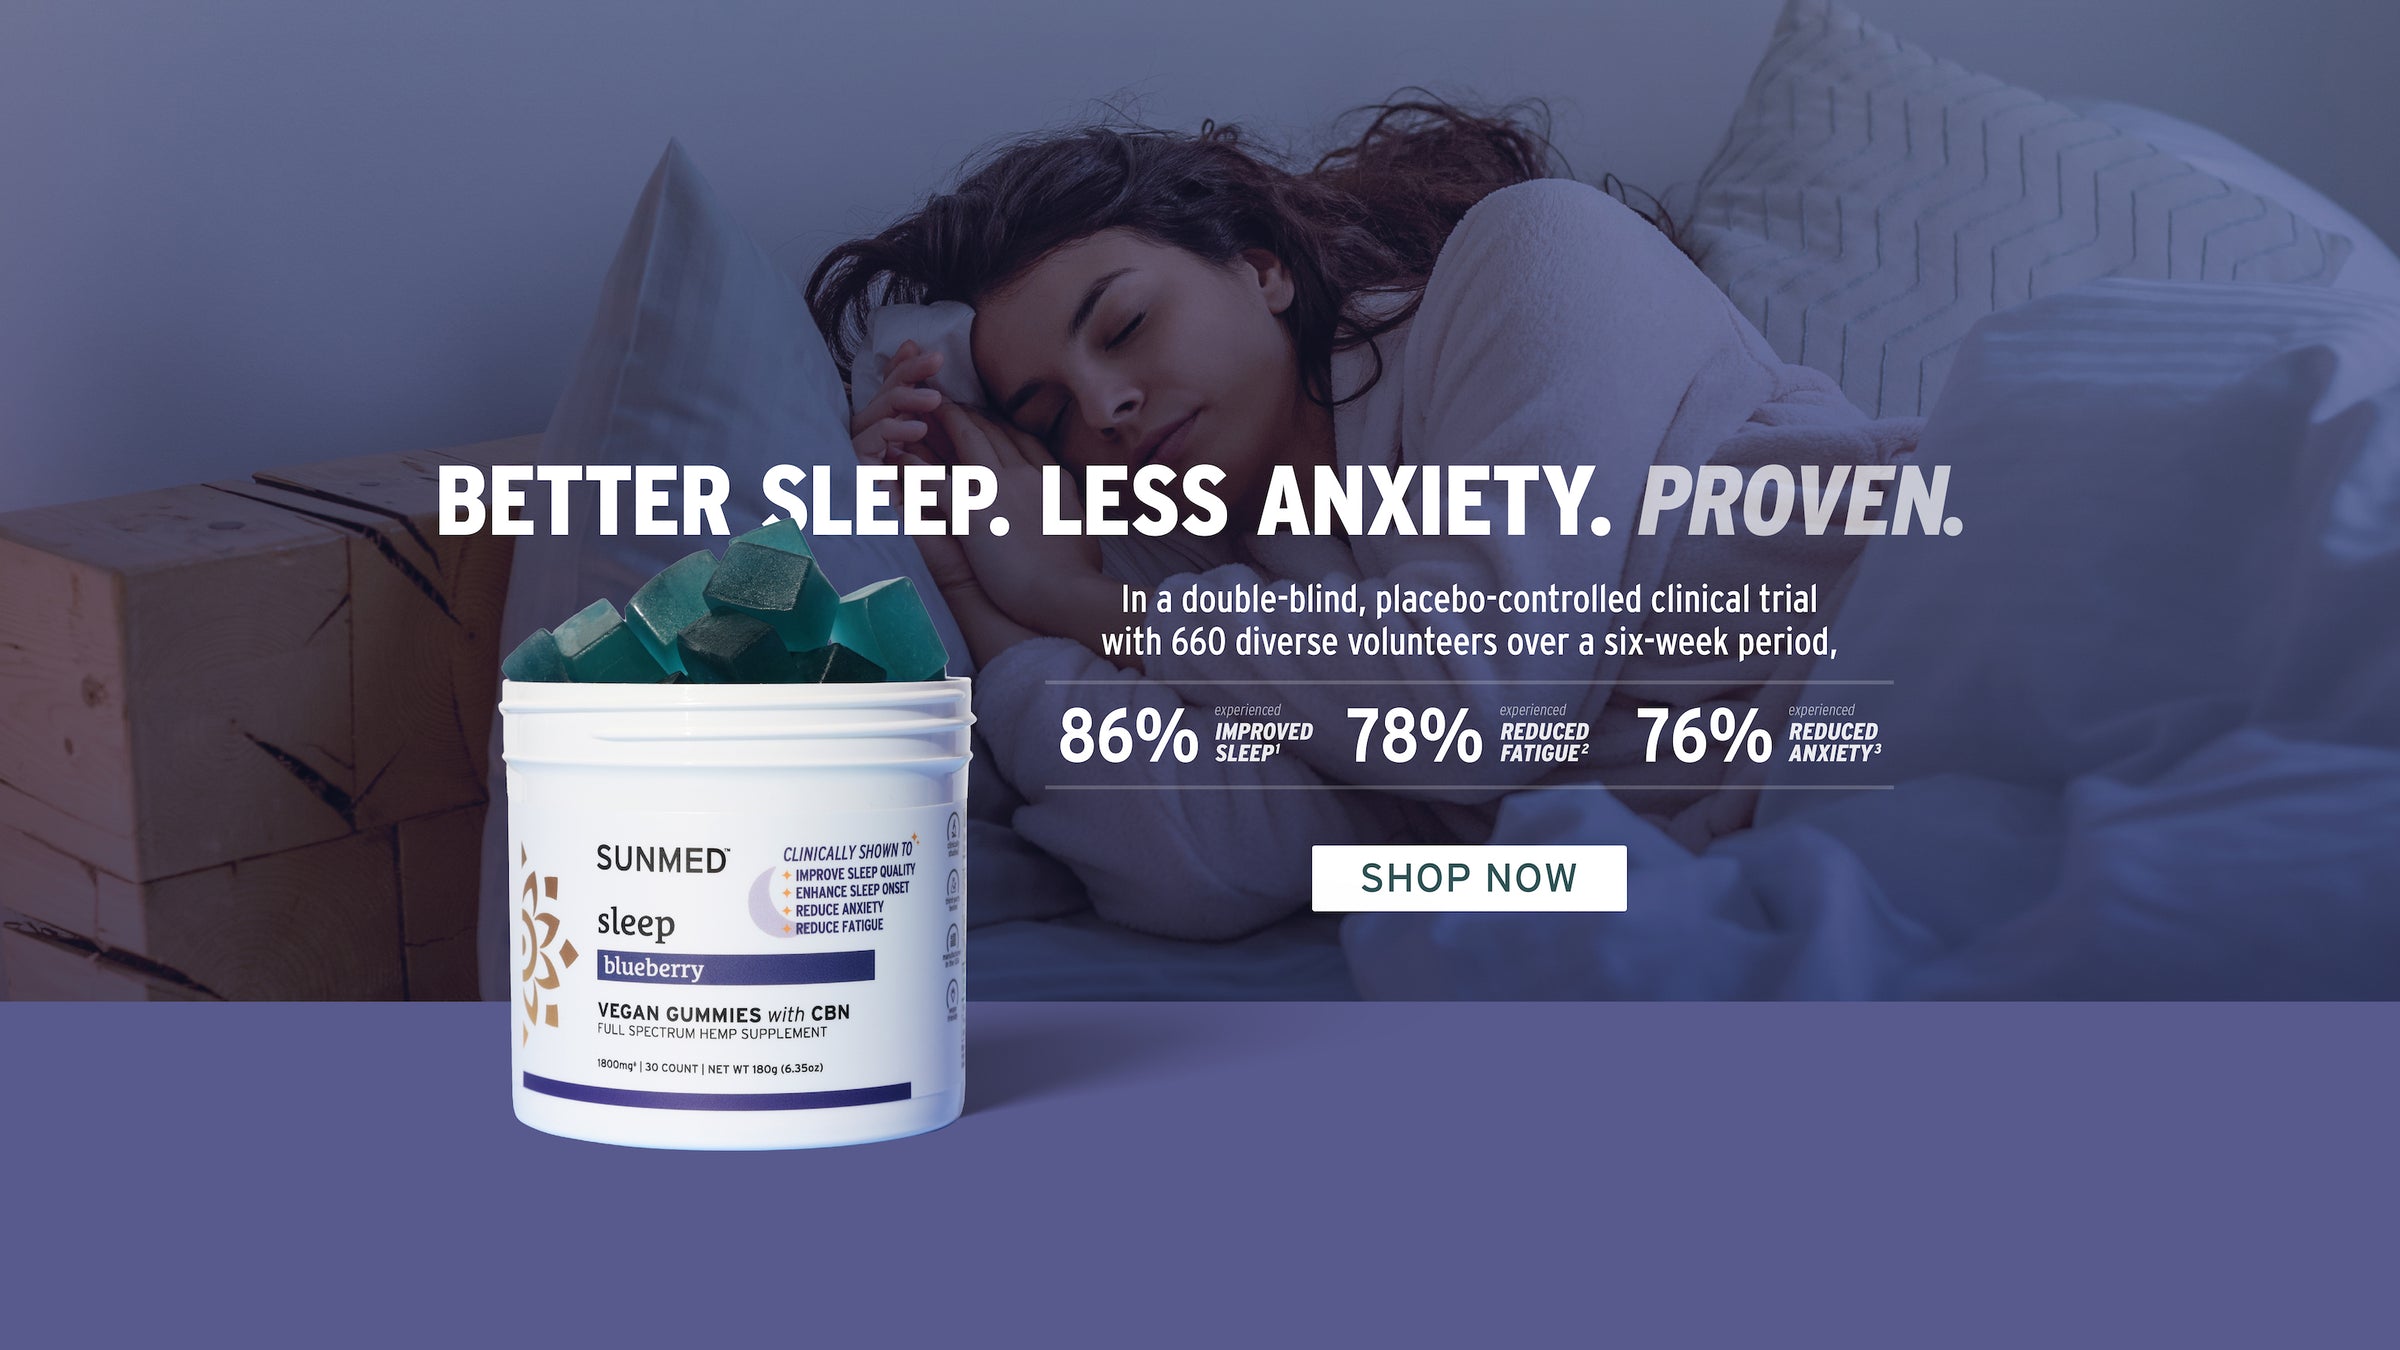 BETTER SLEEP. LESS ANXIETY. PROVEN.